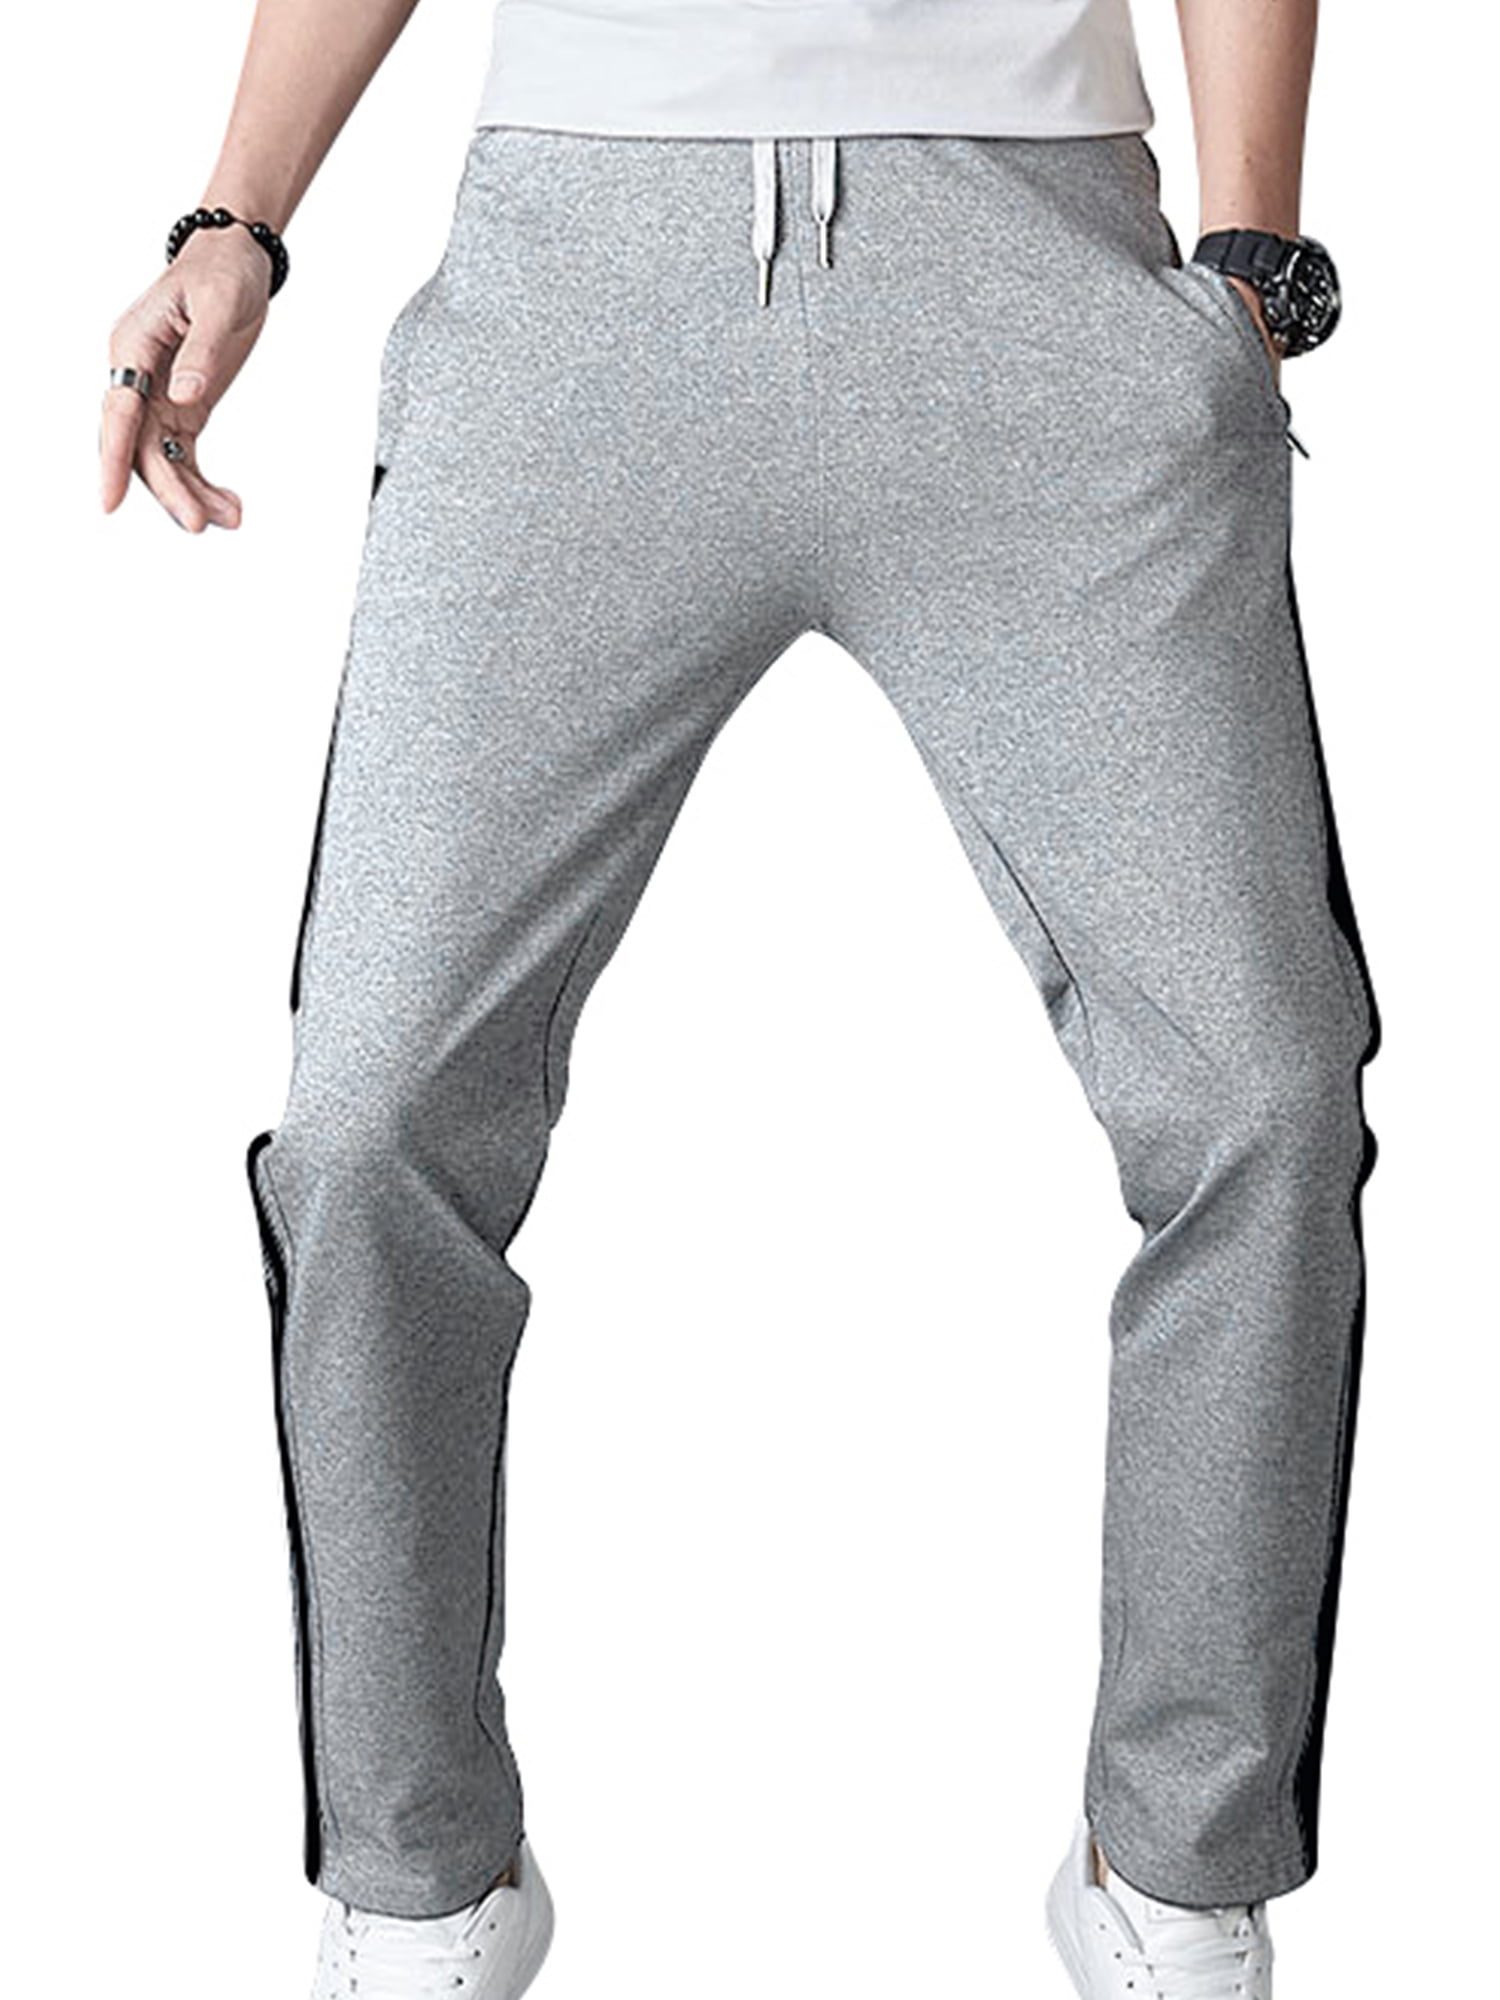 HUGE SPORTS Mens Joggers Pants Casual Gym Workout Track Pants Casual Fit Sweatpants with Pockets